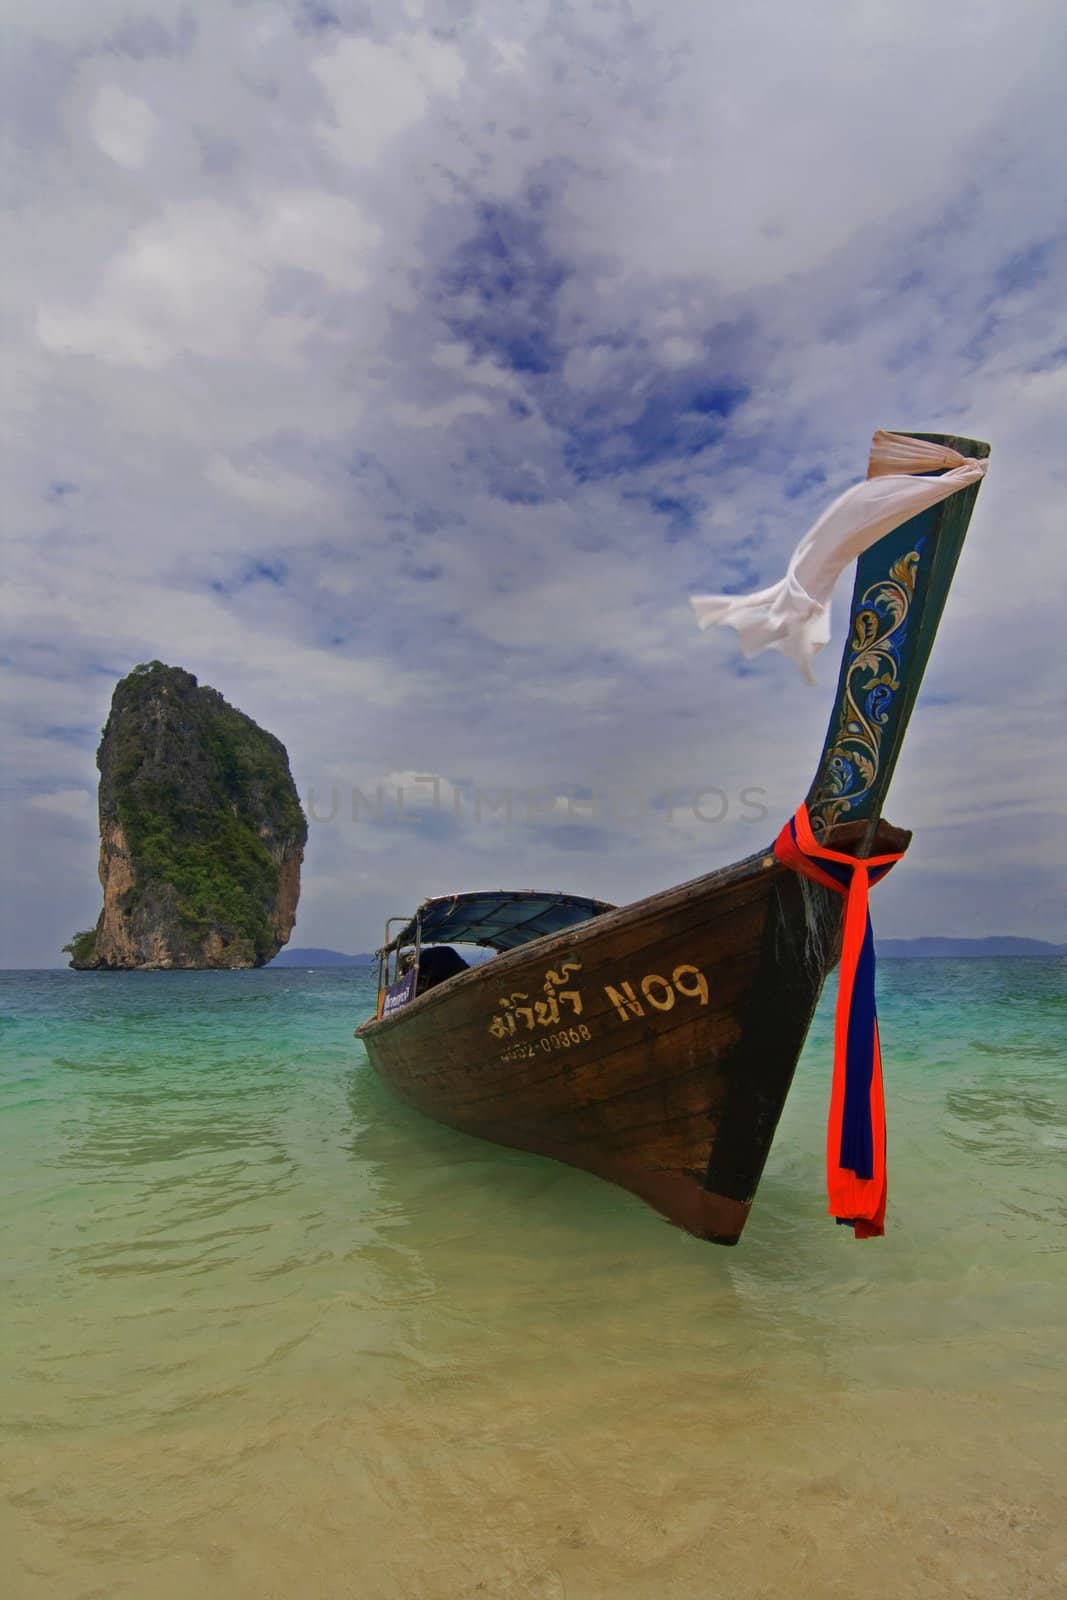 Longtailboat tied up at the beach in Thailand 